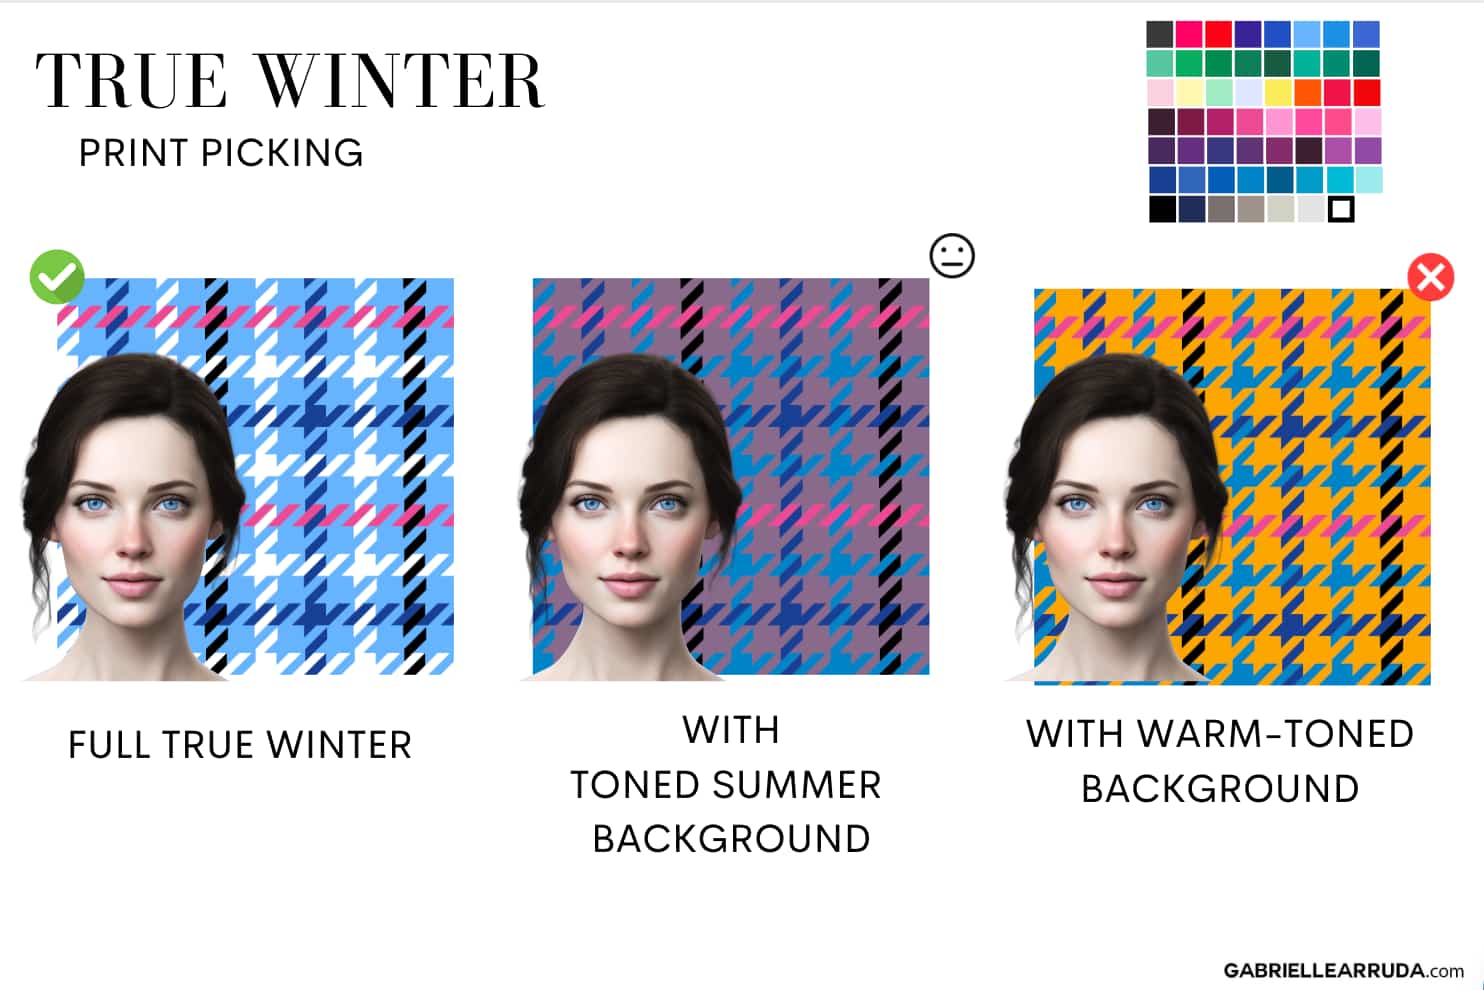 The #TrueWinter Season Features . This seasons primary characteristic , bright winter